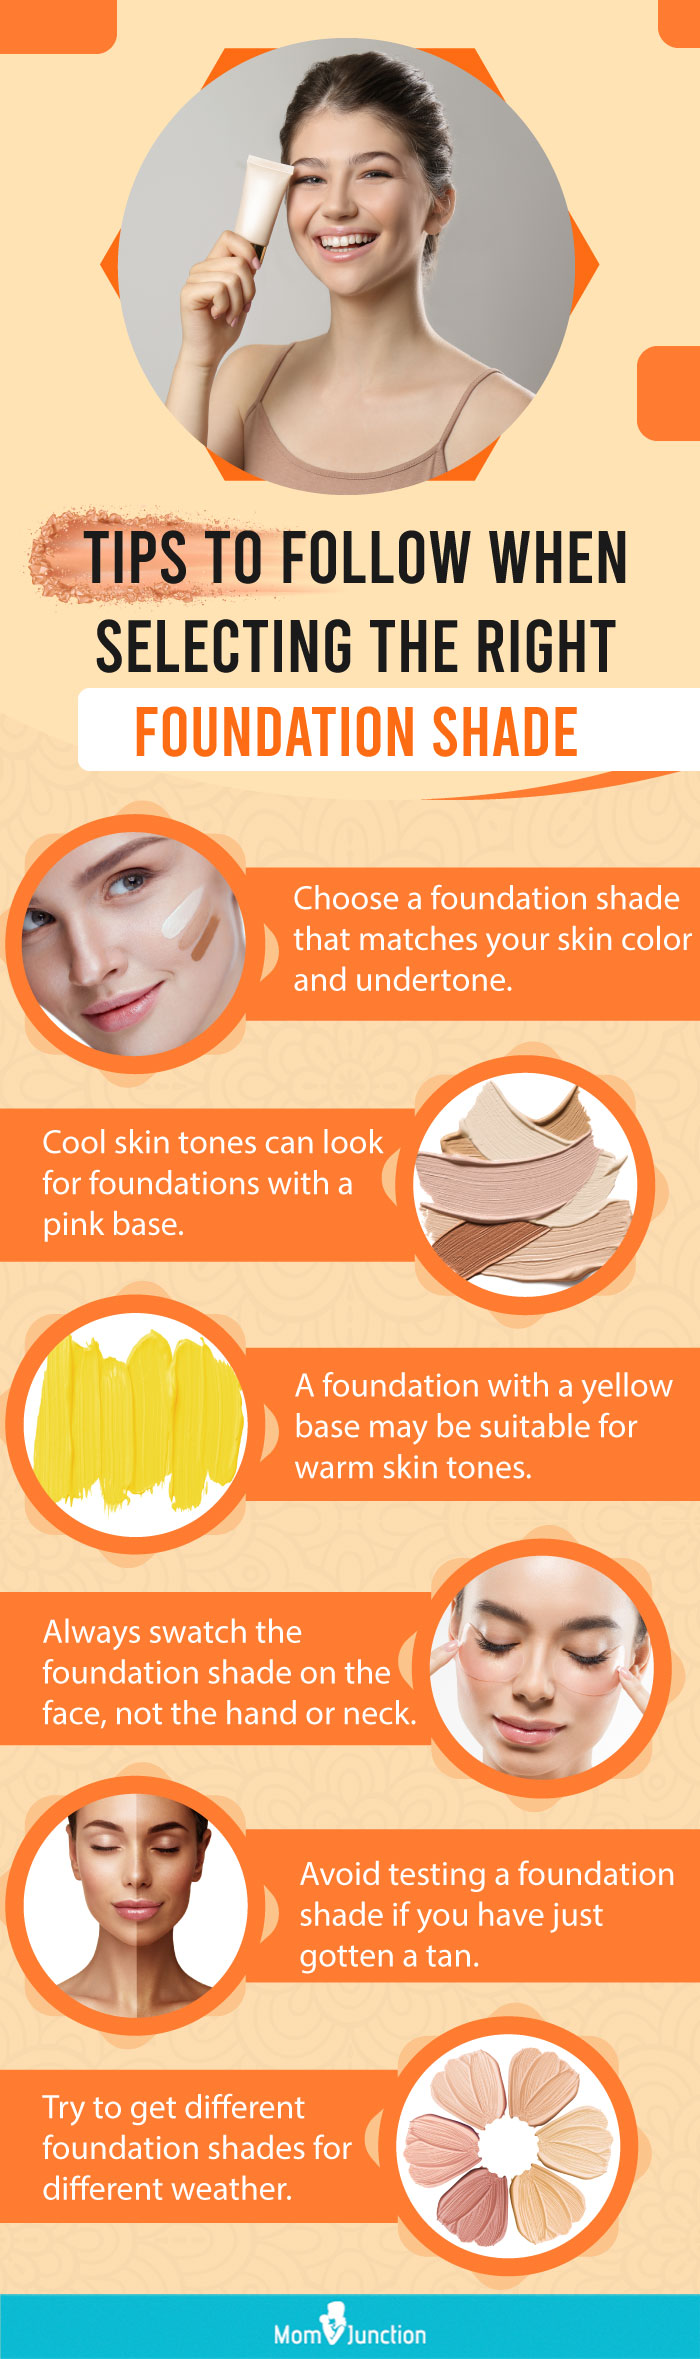 Tips To Follow When Selecting The Right Foundation Shade (infographic)